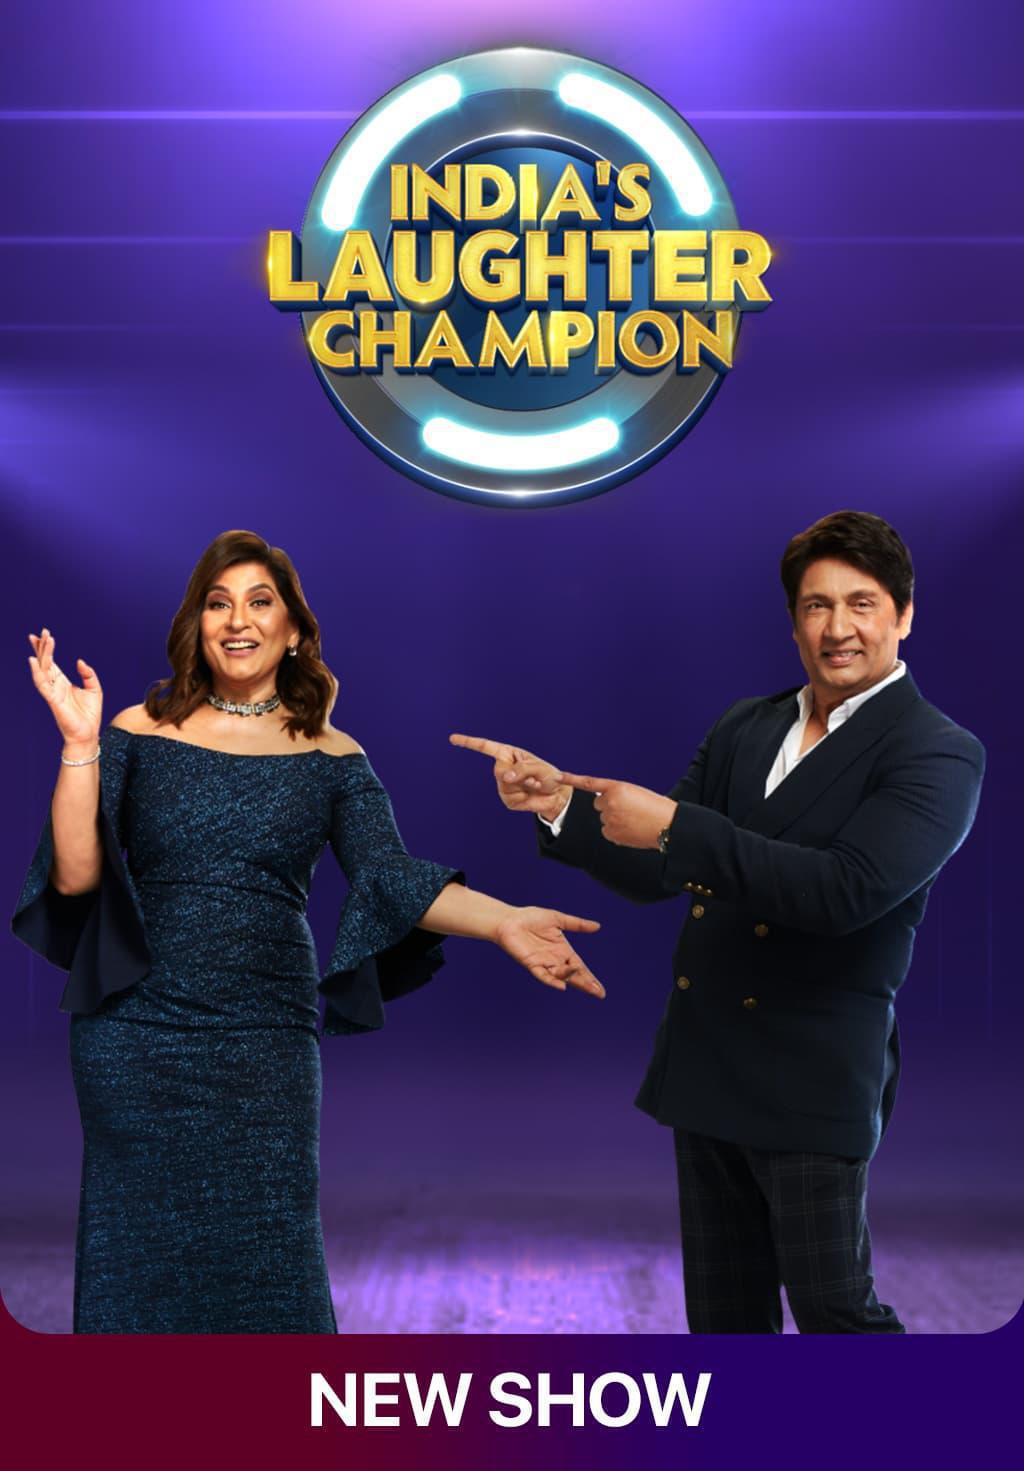 TV ratings for India’s Laughter Champion in Irlanda. Sony TV series